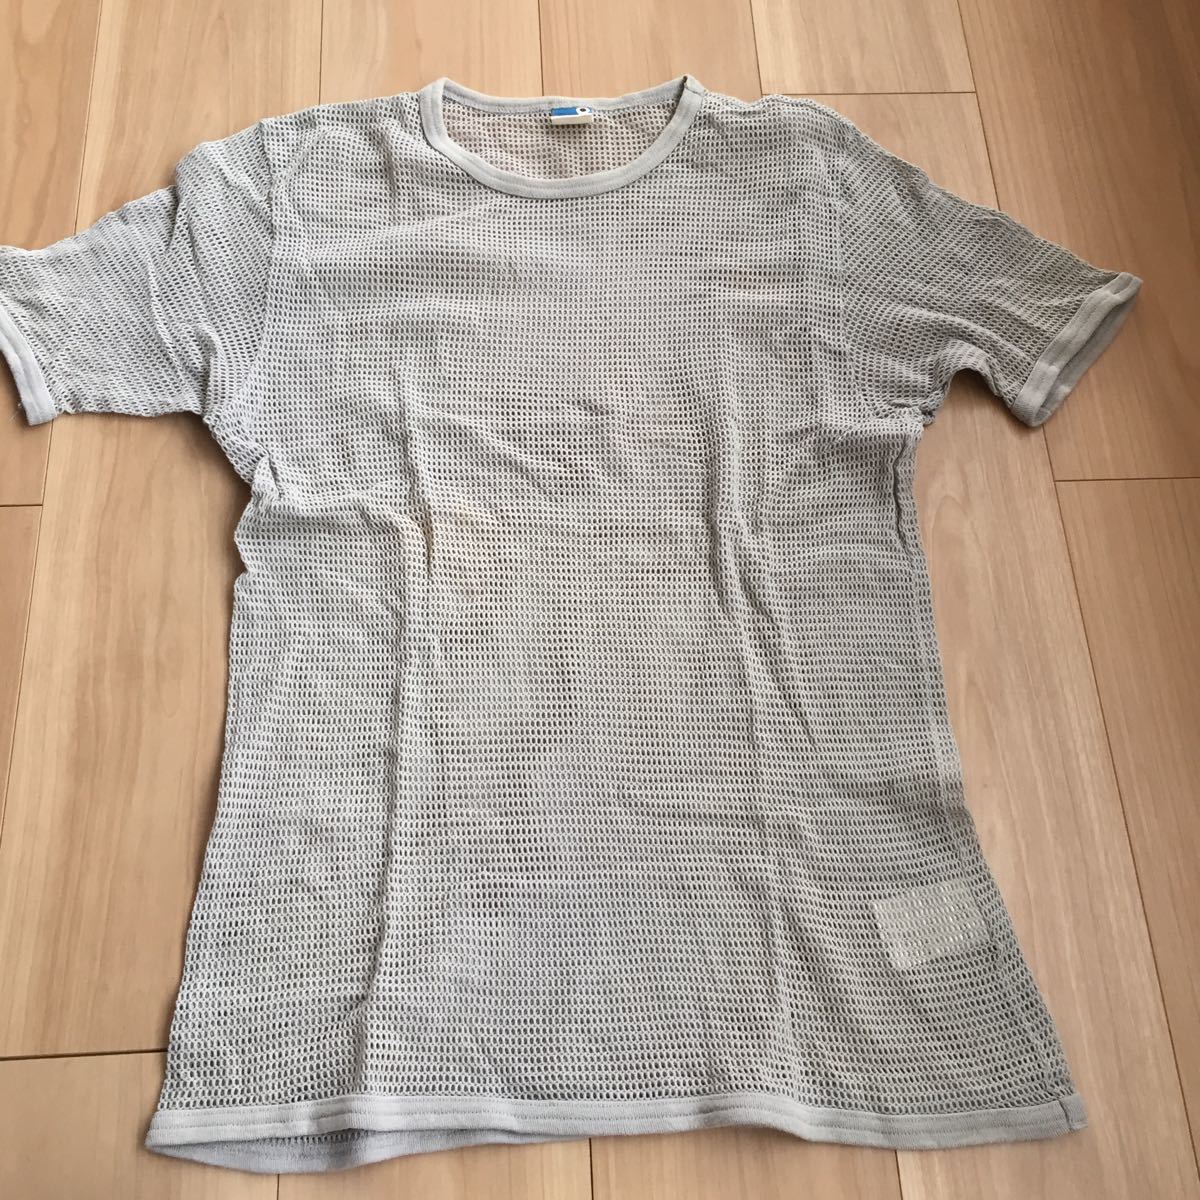  short sleeves men's circle collar mesh T-shirt gray BLUE LABEL UNITED ARROWS United Arrows Blue Label M size piling put on cotton 100%